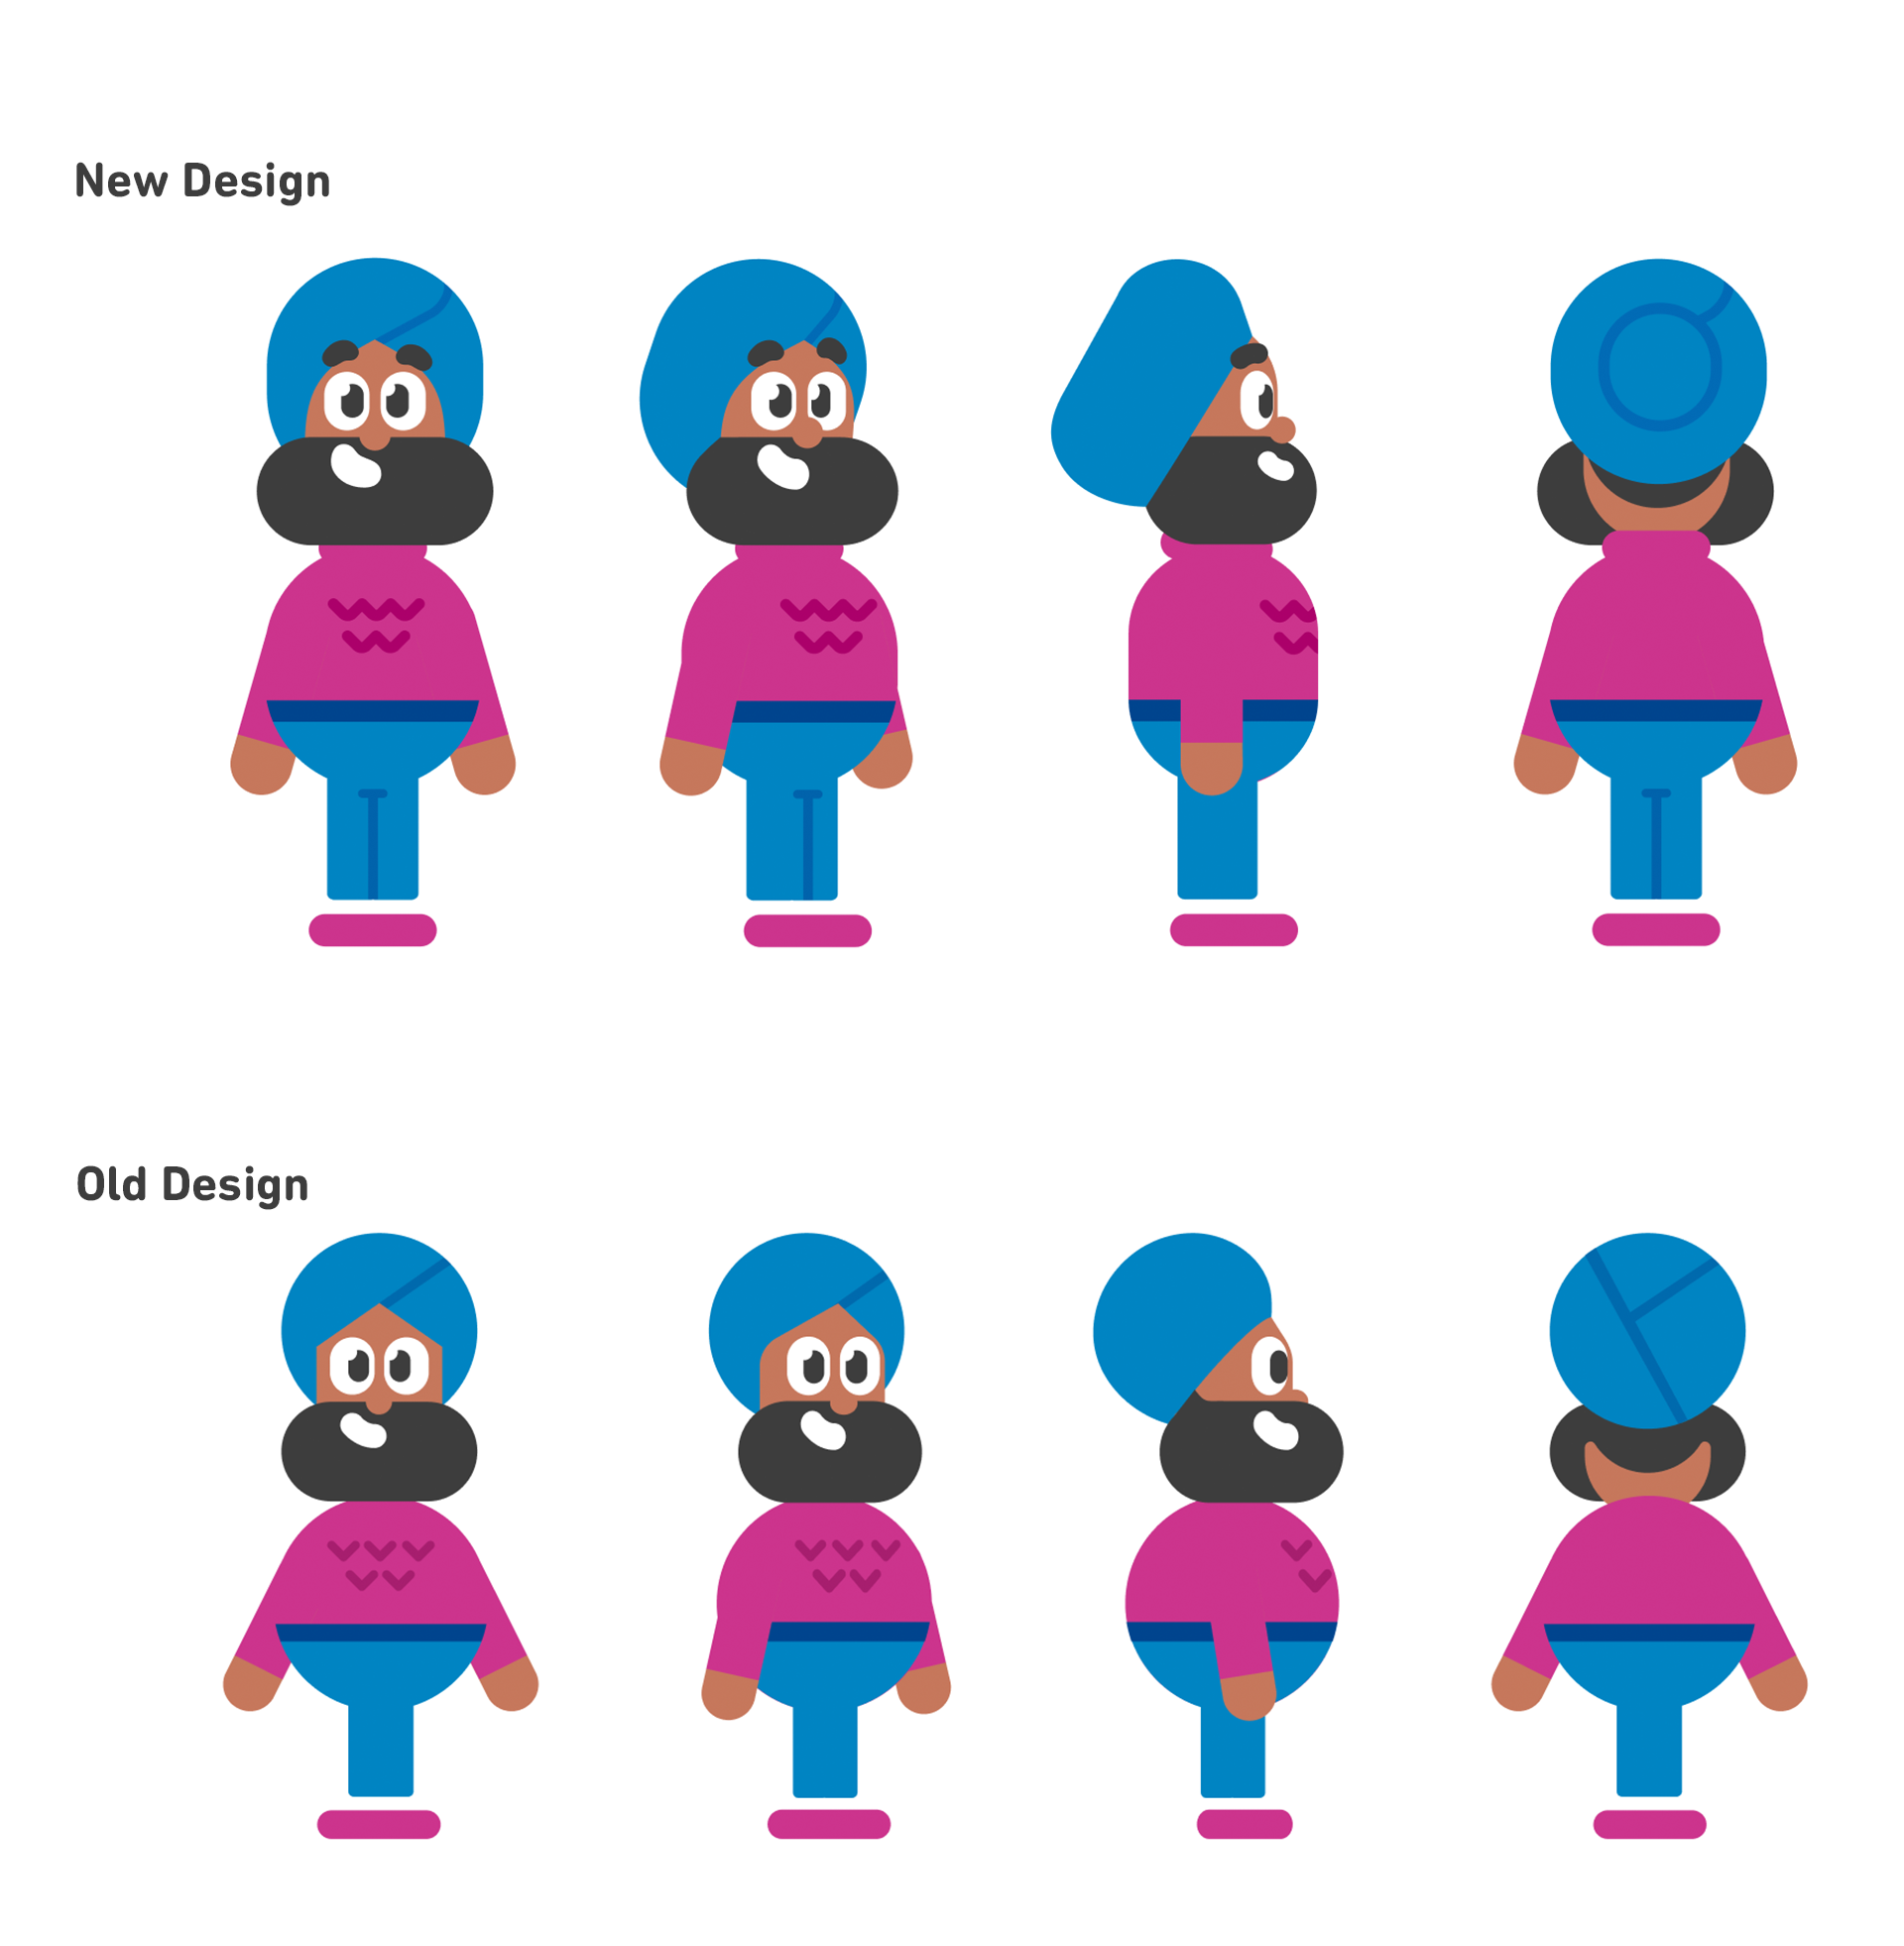 a turnaround of Vikram showing front, ¾, side, and back view to compare old design with new design.